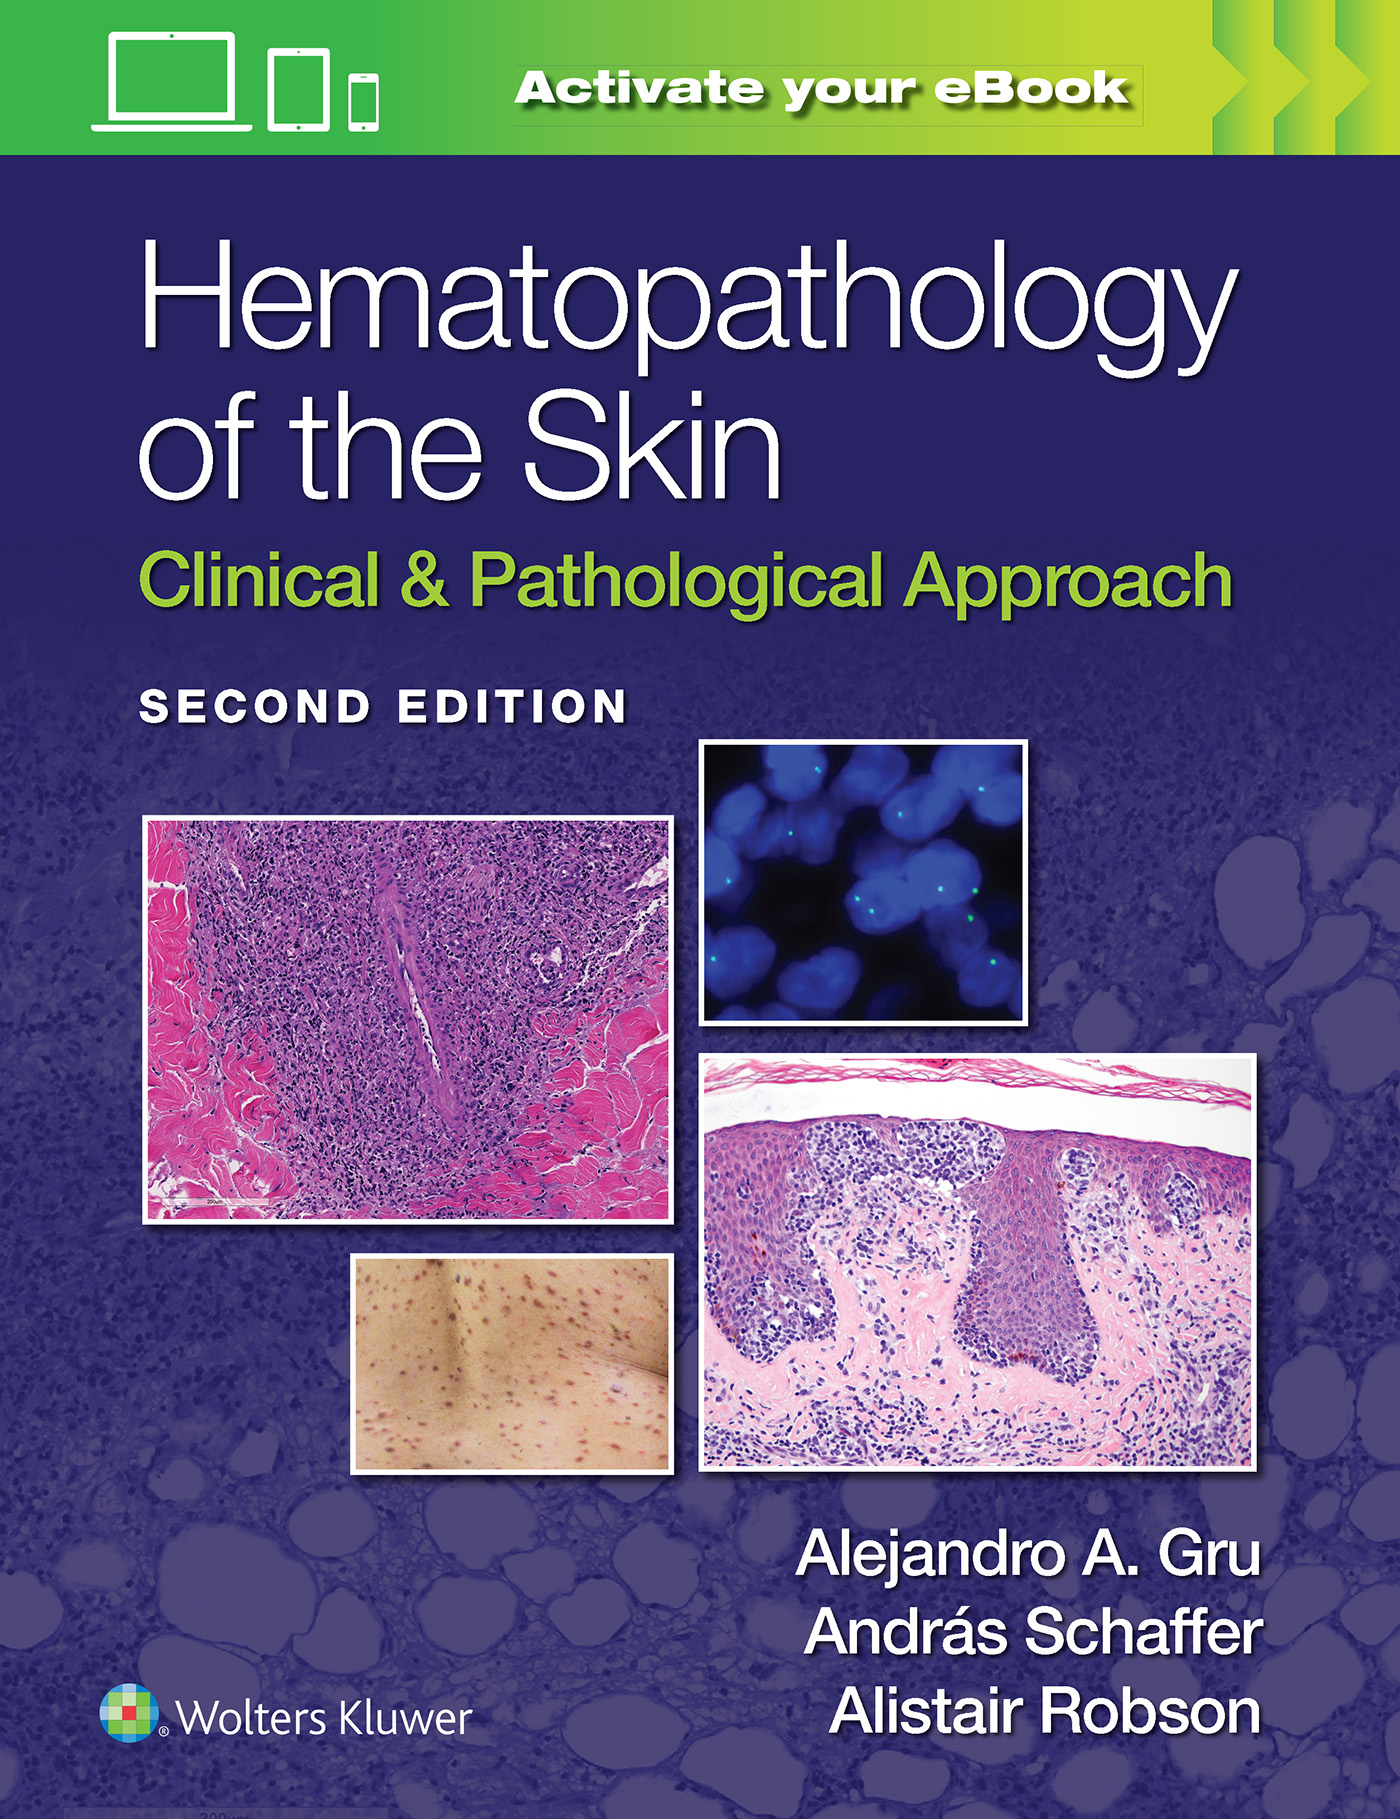 Cover of Hematopathology of the skin featuring images of types of skin cells on a purple background